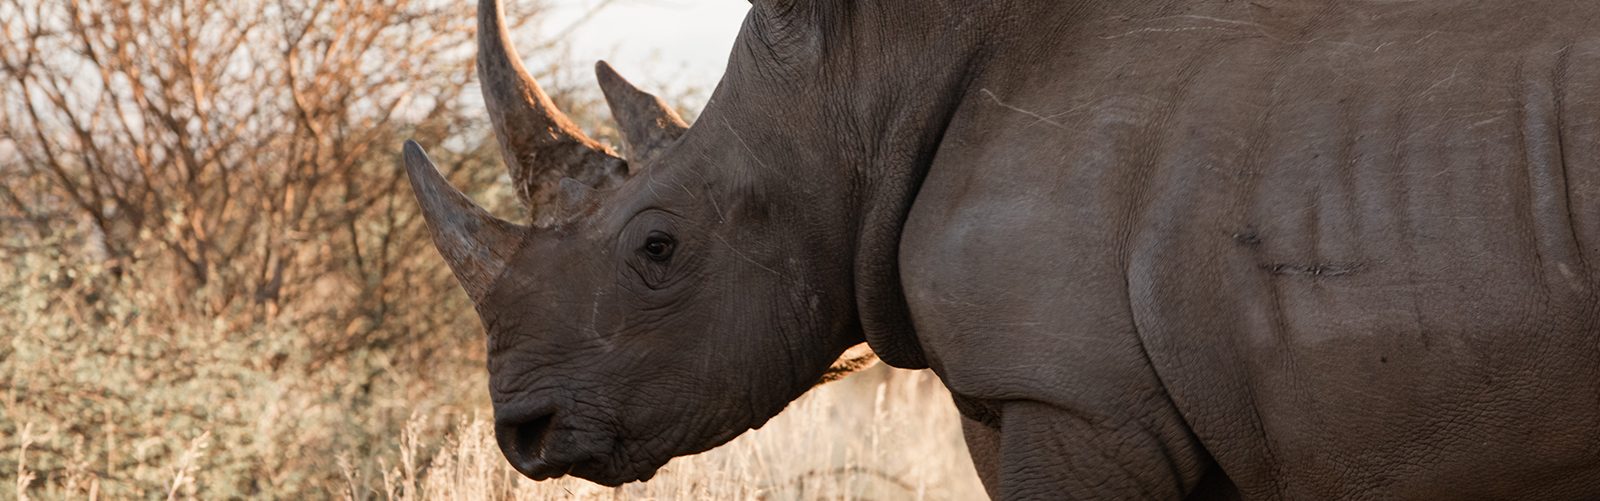 Become a partner at the rhino sanctuary Namibia